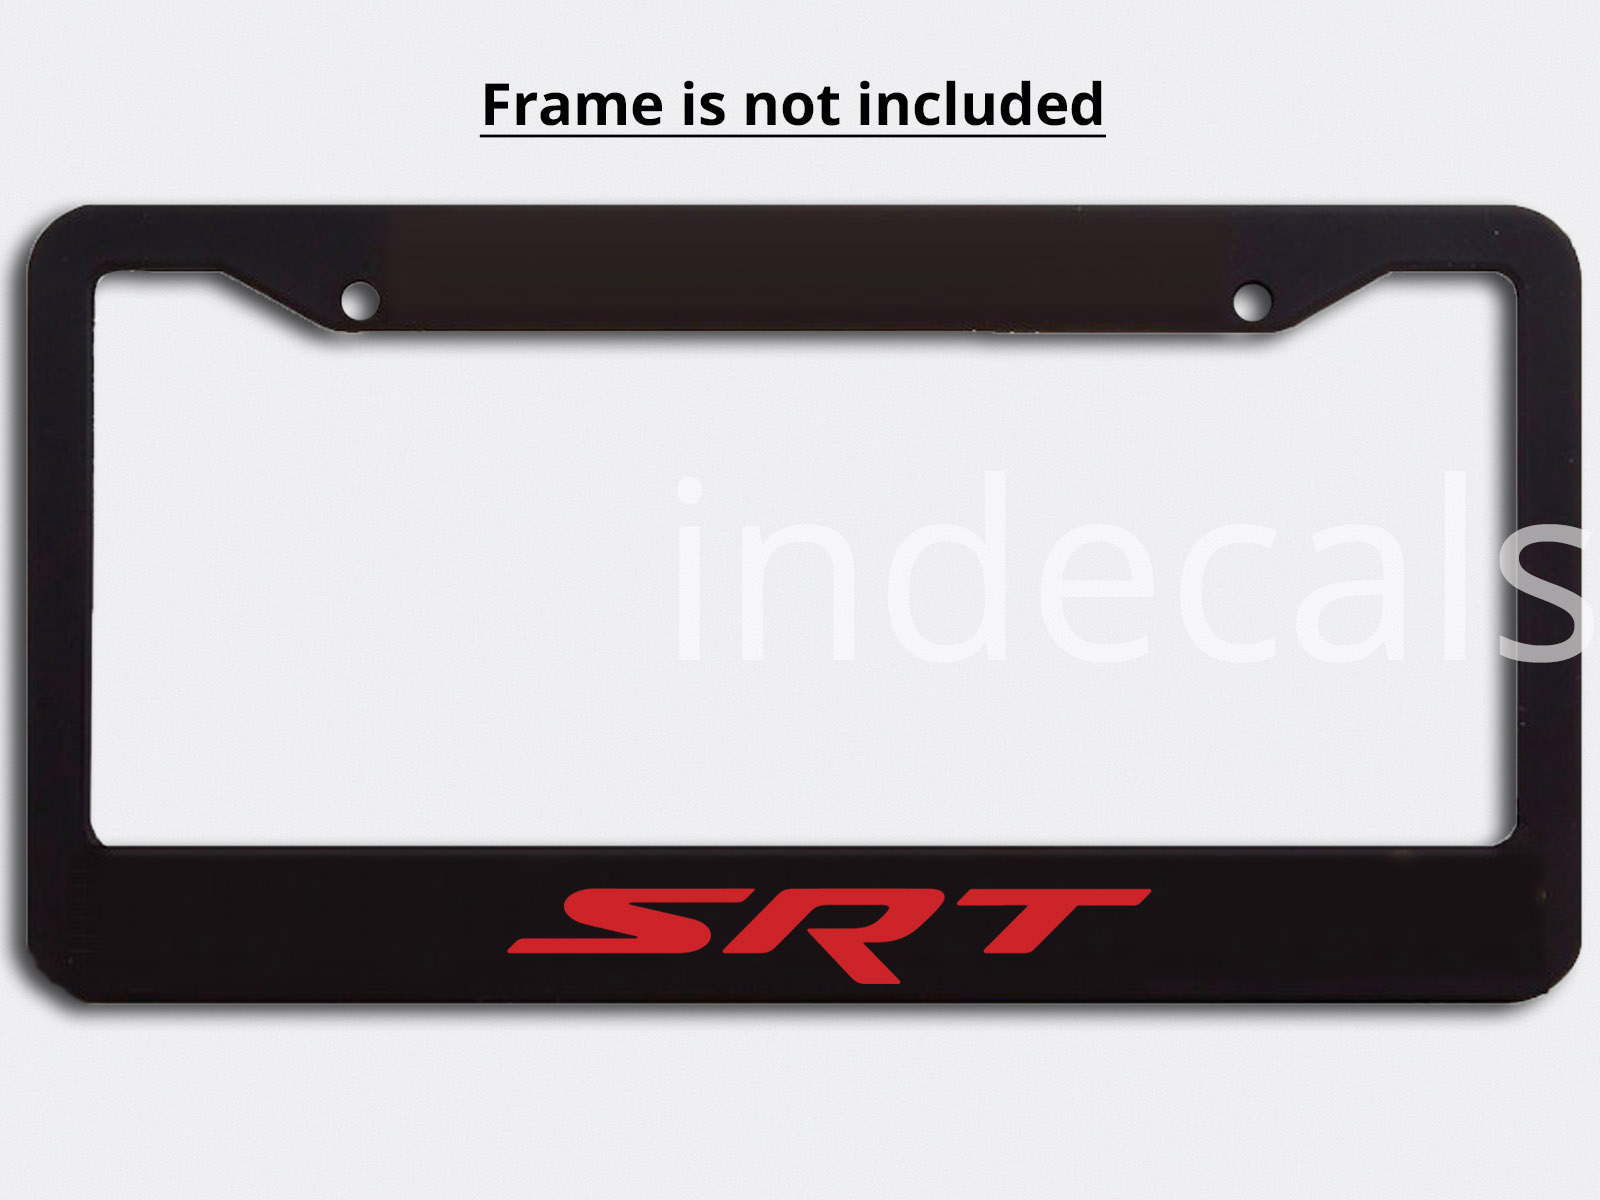 3 x Dodge SRT Stickers for License Plate Frame - Red